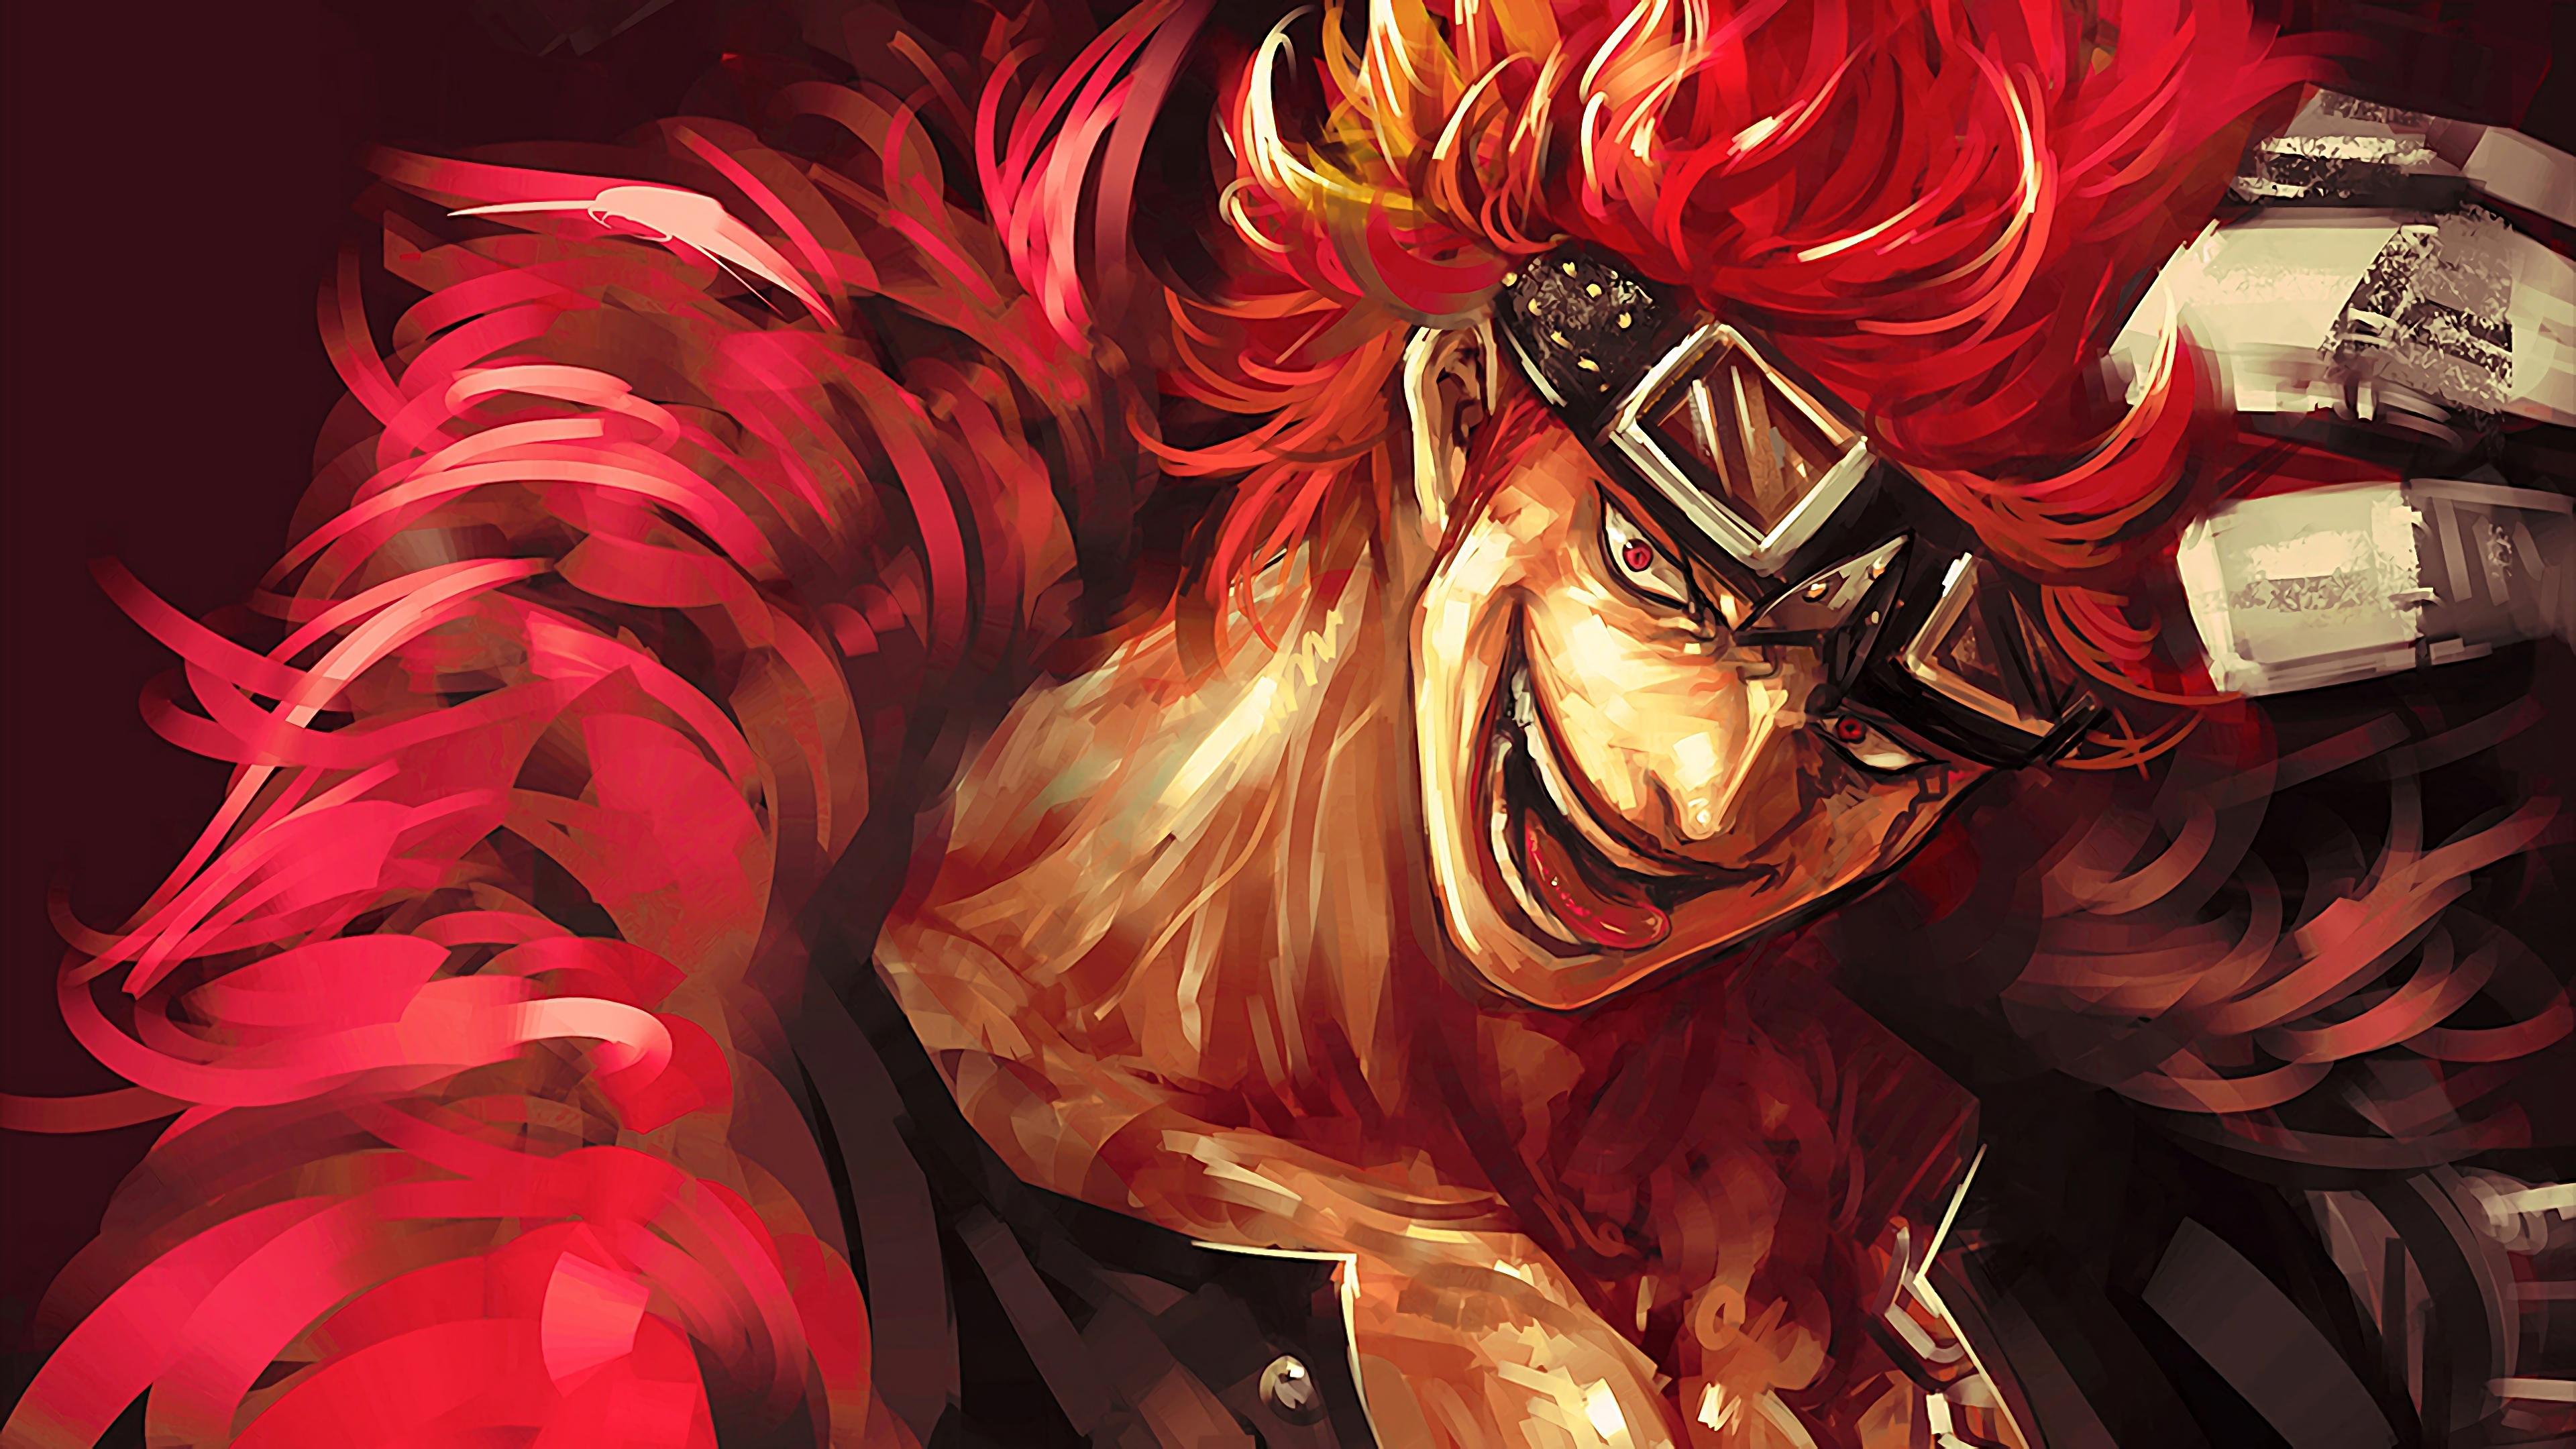 One Piece Red Film Hd Wallpapers Free Download - Wallpaperforu